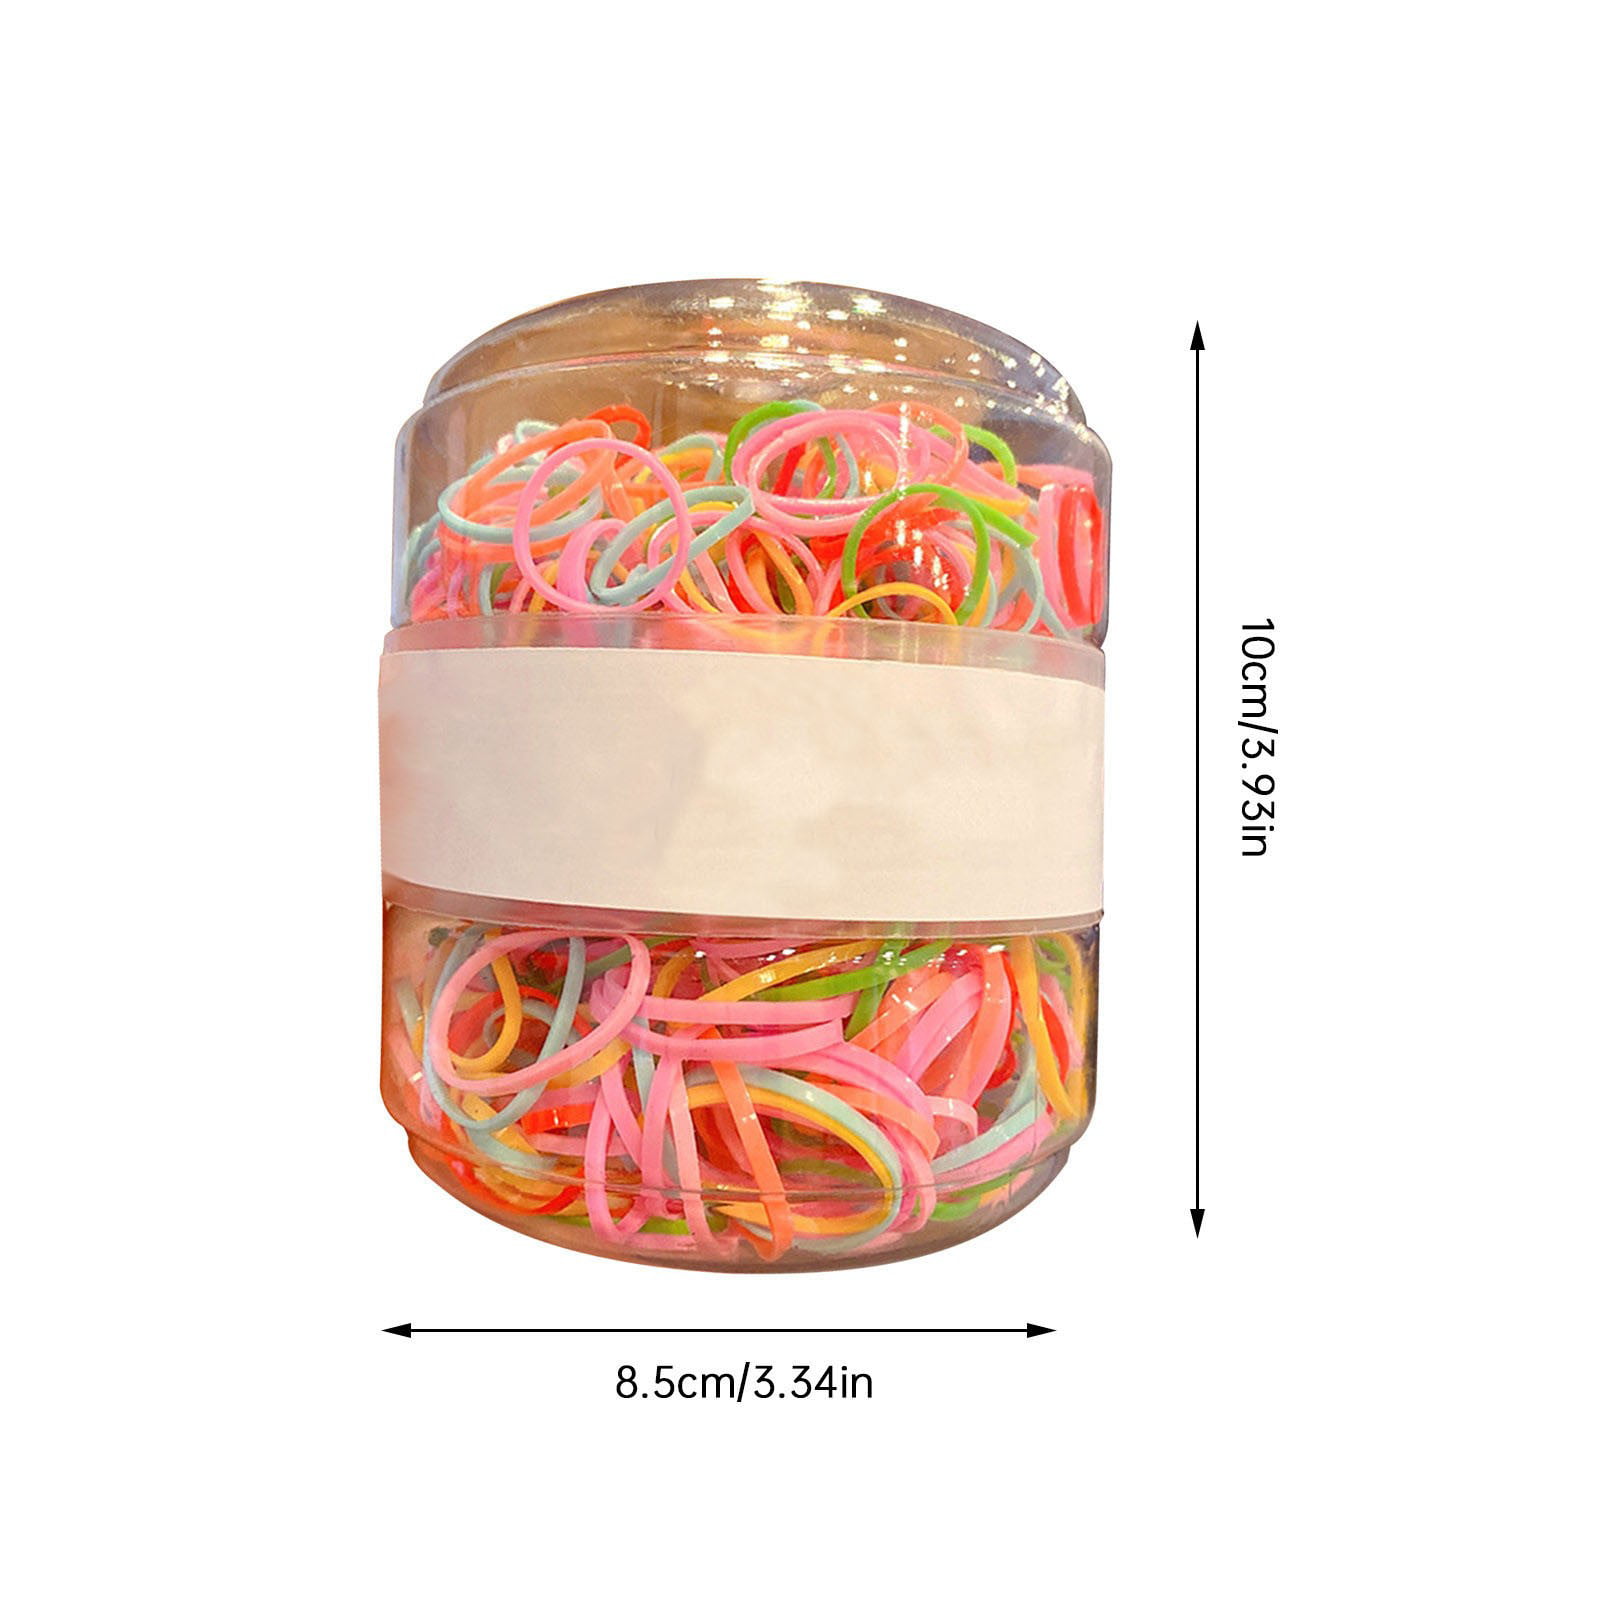 28 Colors Rubber Bands for Hair with 8 Hair Styling Tools 1500 Pcs